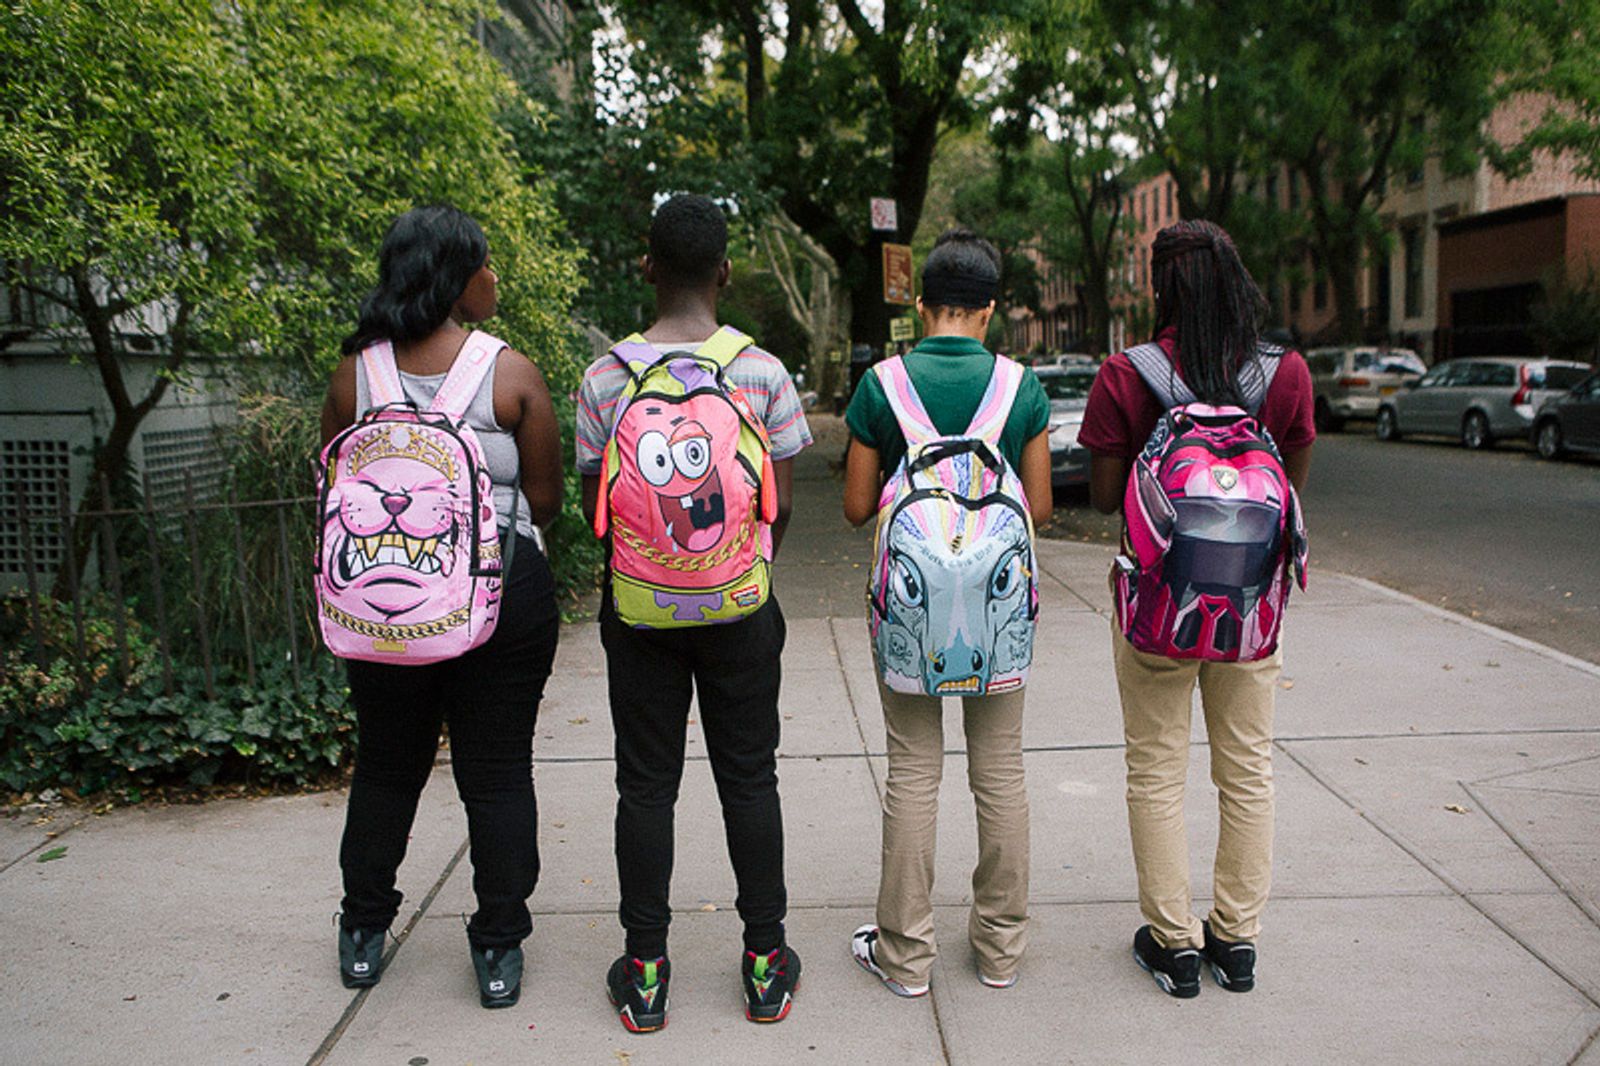 © Cassandra Giraldo - The first day of school in New York City. Kids sport backpacks purchased from Fulton Mall in Brooklyn.